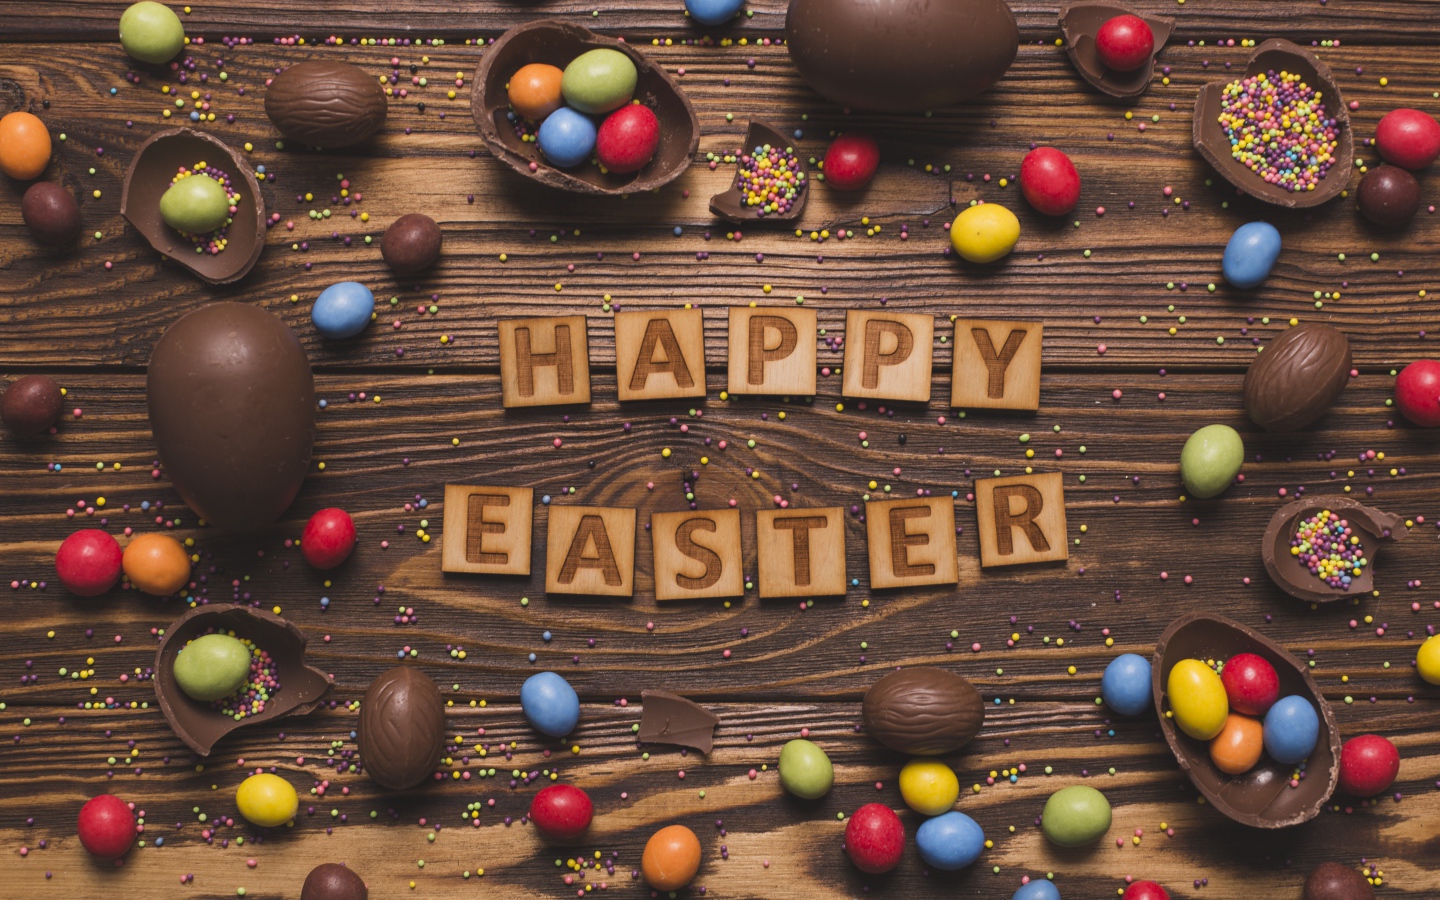 The inscription in English Happy Easter on the table with chocolate eggs and sweets